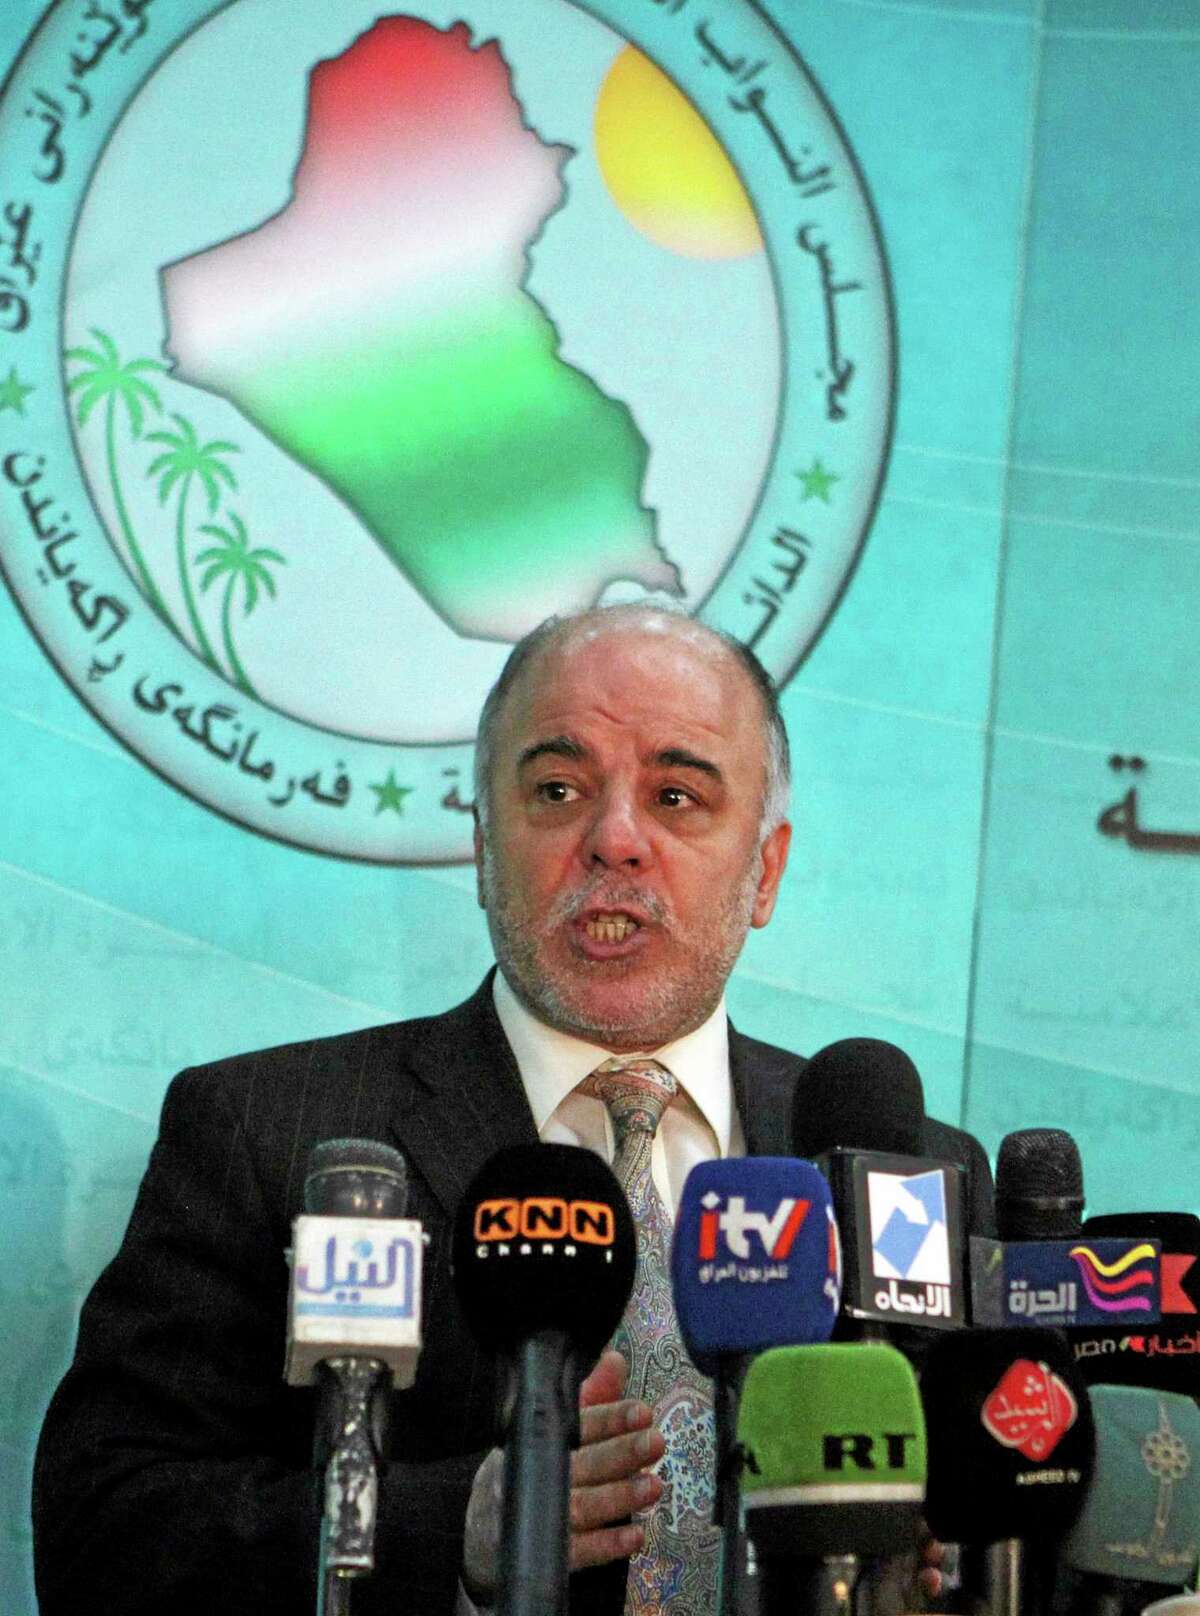 FILE - In this Saturday, Dec. 5, 2009 file photo, Shiite lawmaker Haider al-Ibadi speaks to the press after an Iraqi Parliament session about the election law in Baghdad, Iraq. On Monday, Aug. 11, 2014, Iraq's largest coalition of Shiite political parties chose the Deputy Parliament Speaker Haider al-Ibadi to be its candidate to lead the government in a major defeat for incumbent Prime Minister Nouri al-Maliki just hours after he declared himself the rightful candidate and put troops on the street. Critics say the Shiite al-Maliki contributed to the crisis by monopolizing power and pursuing a sectarian agenda that alienated the country's Sunni and Kurdish minorities. (AP Photo/Karim Kadim, File)